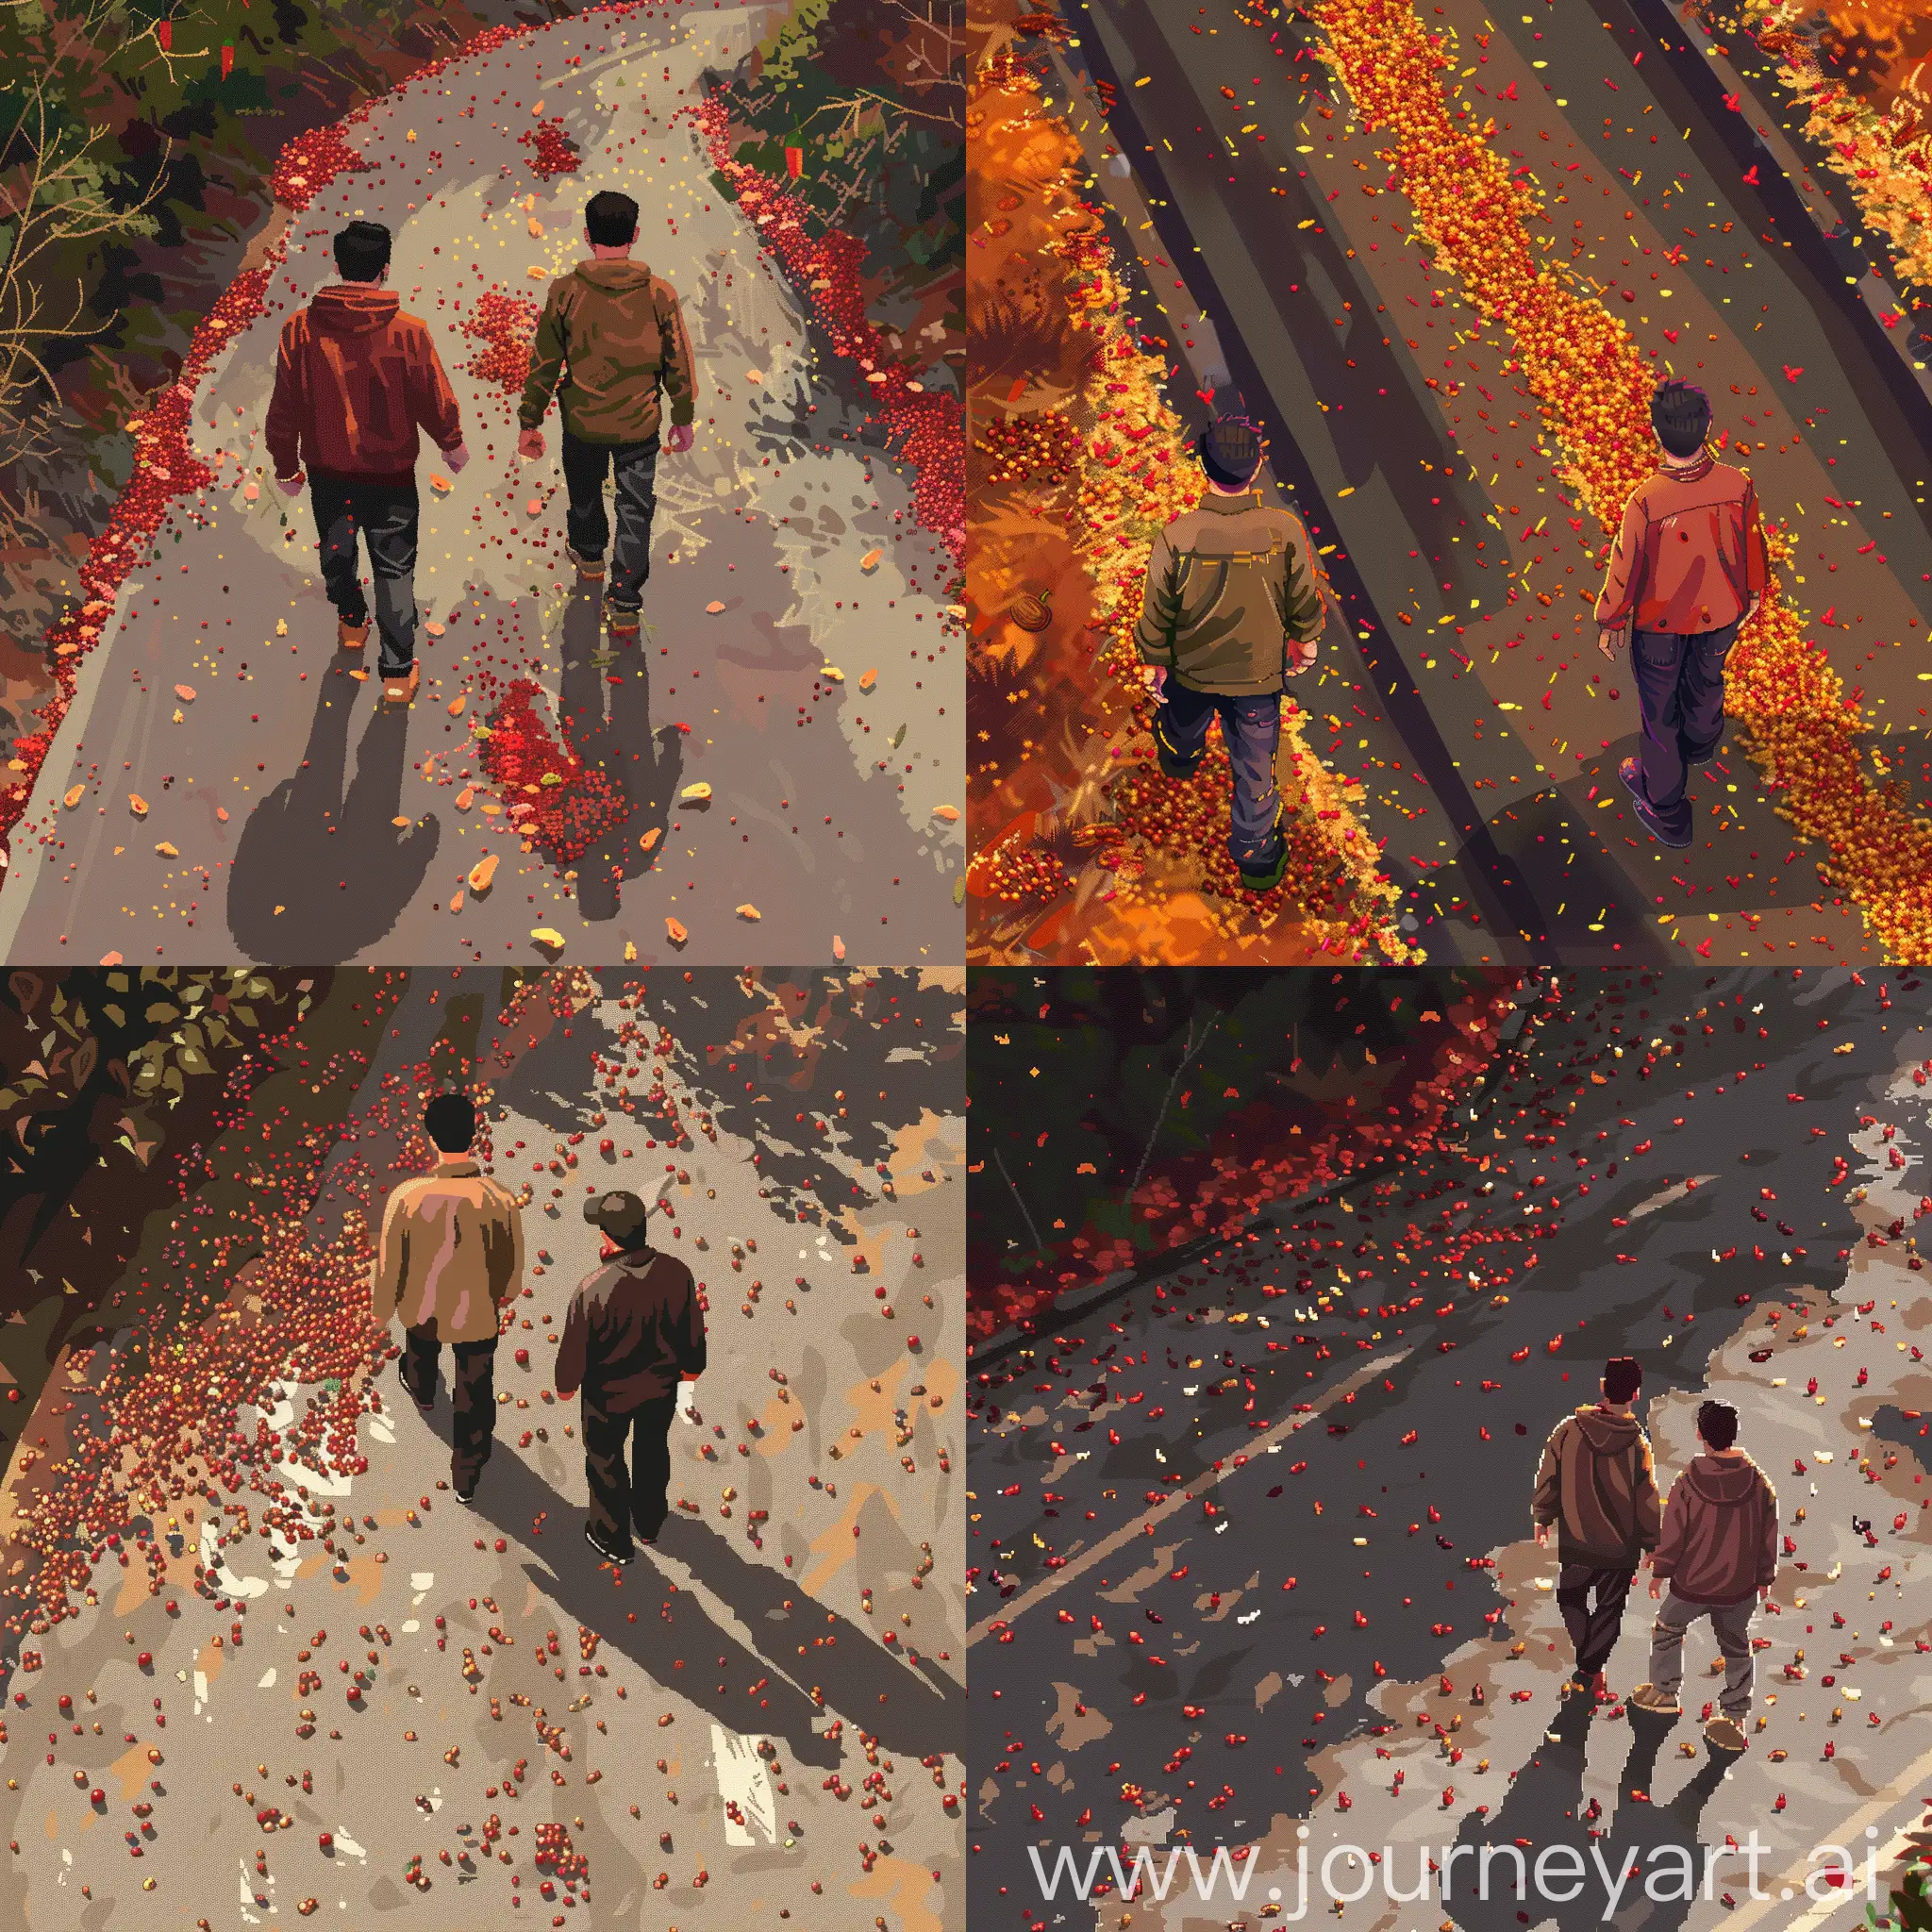 Sichuan-SpiceCovered-Road-Two-Men-Strolling-in-a-PixelStyle-Landscape